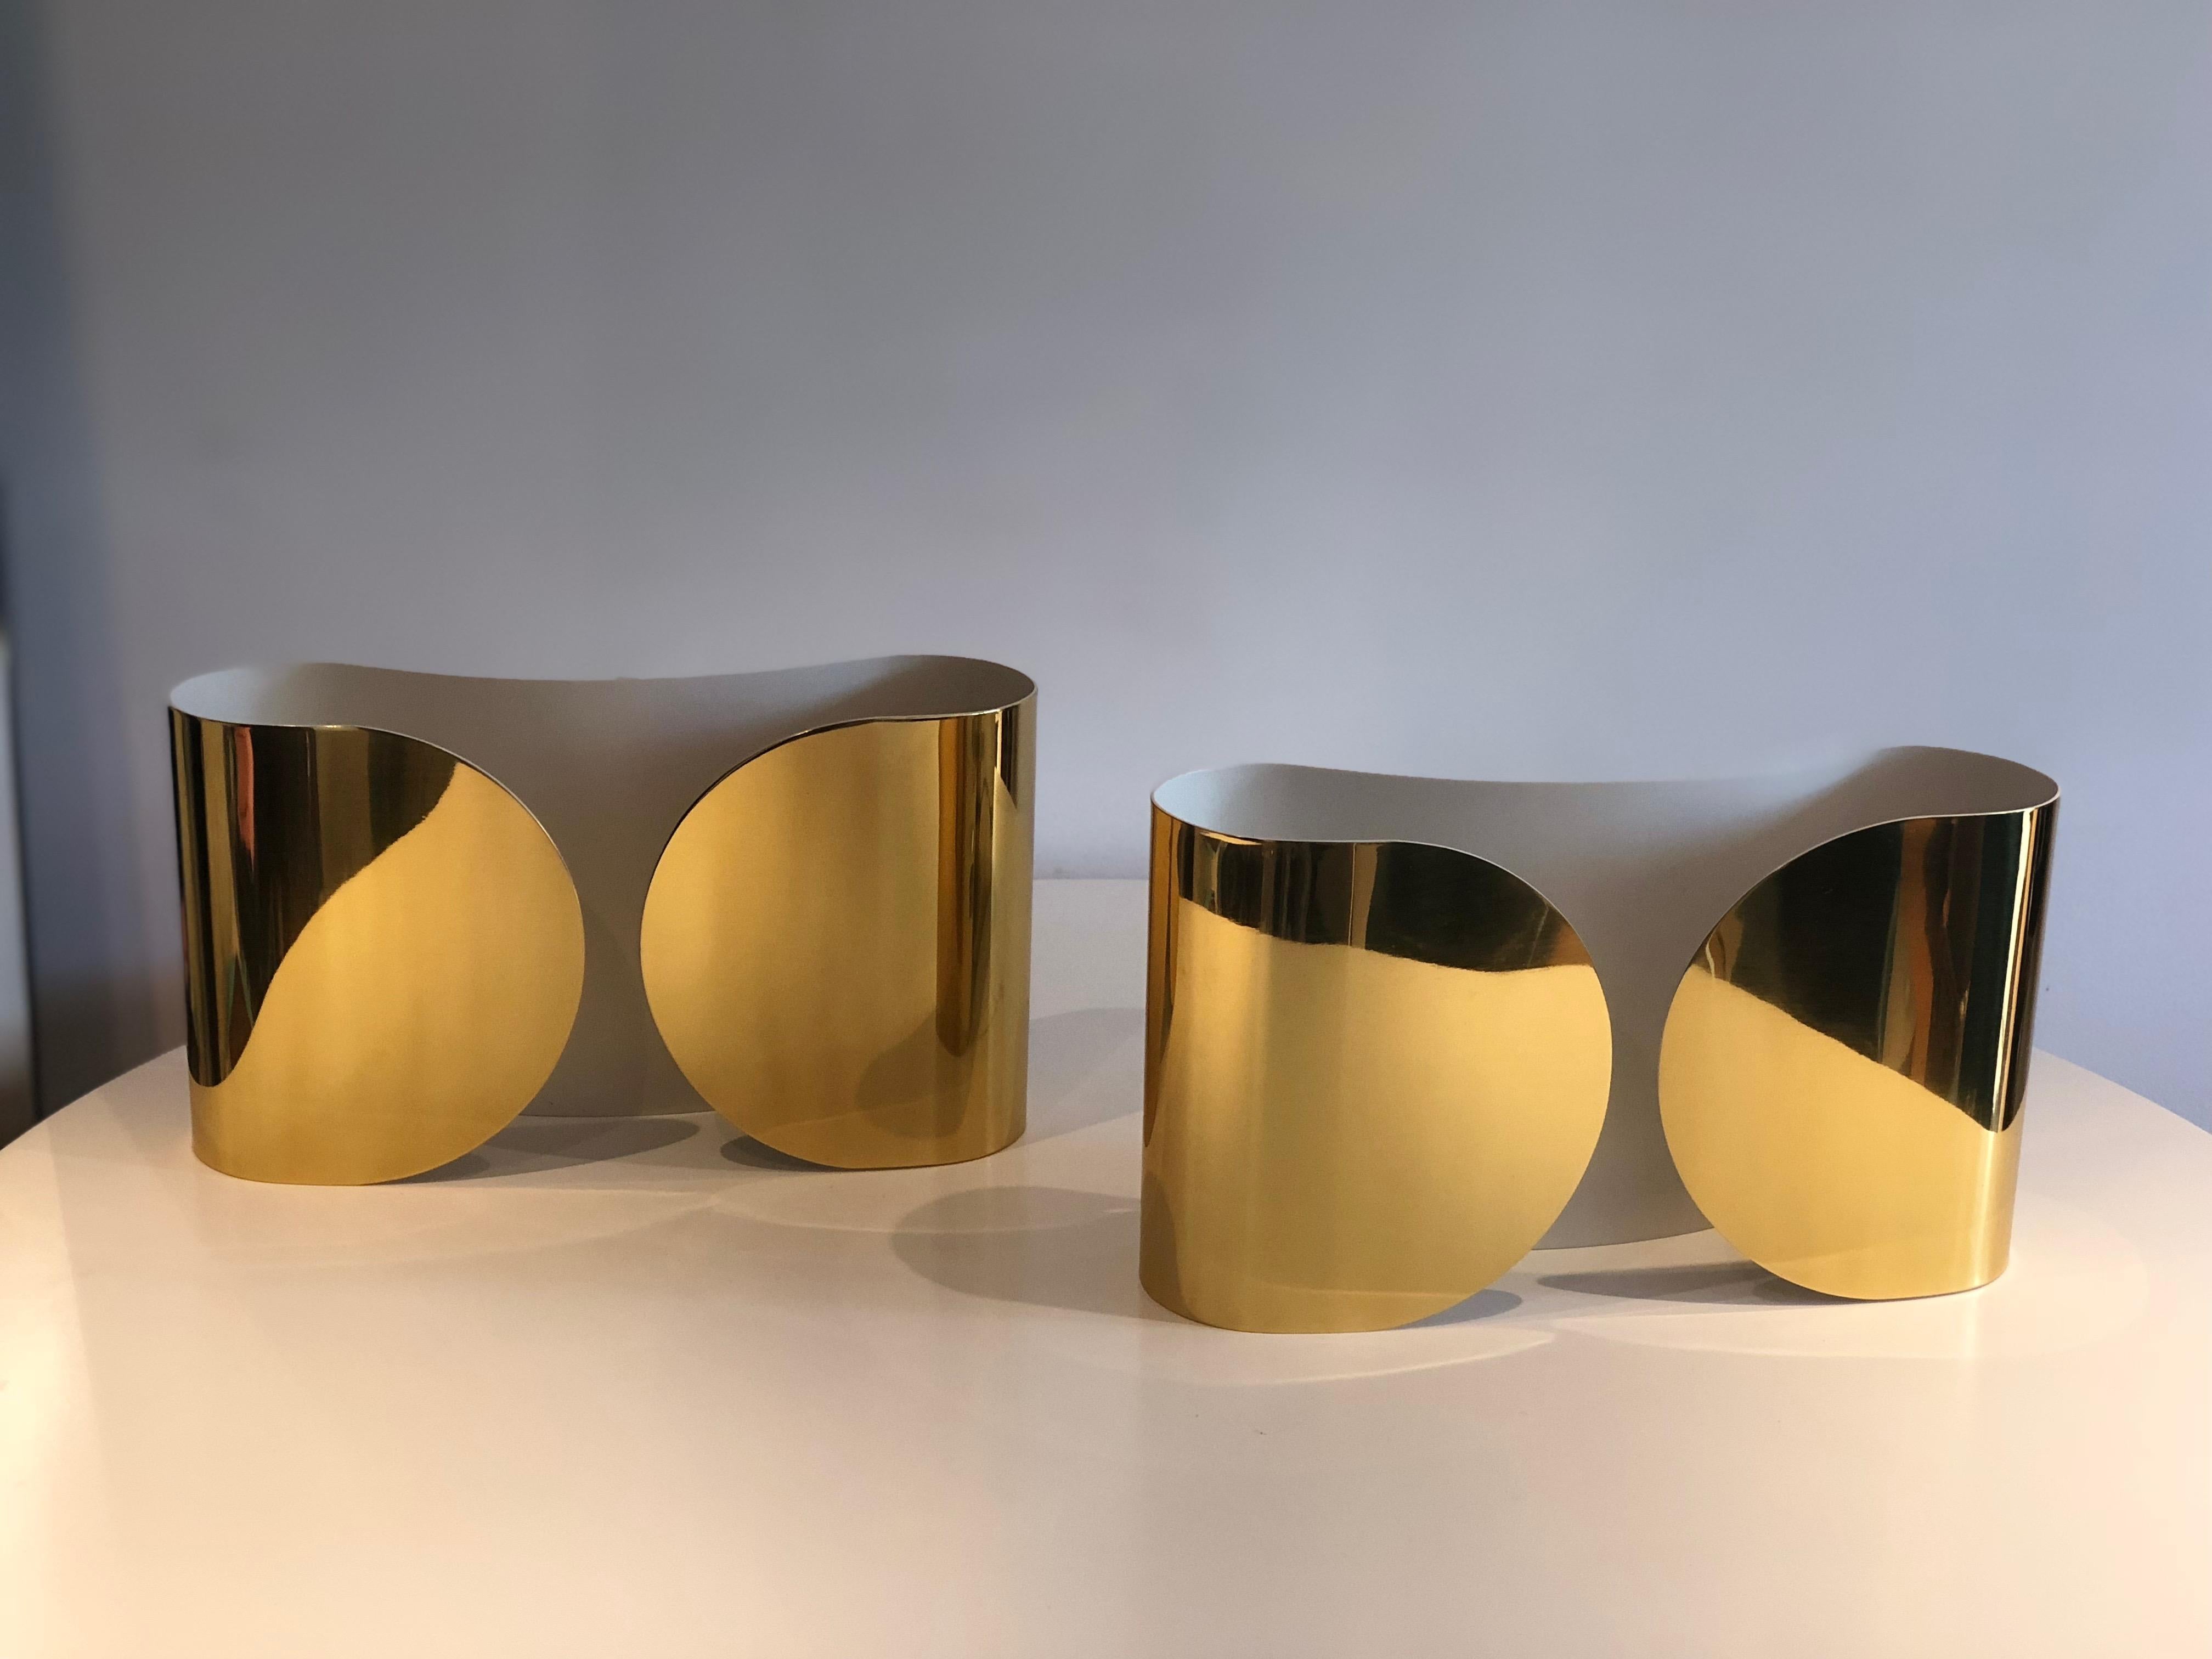 A pair of Foglio wall light sconces by Tobia Scarpa for Flos in a polished brass finish and white enamel interiors. Each curved design fits two lights and are in fully working condition. 
Each in their original boxes, plastic wrap and silver